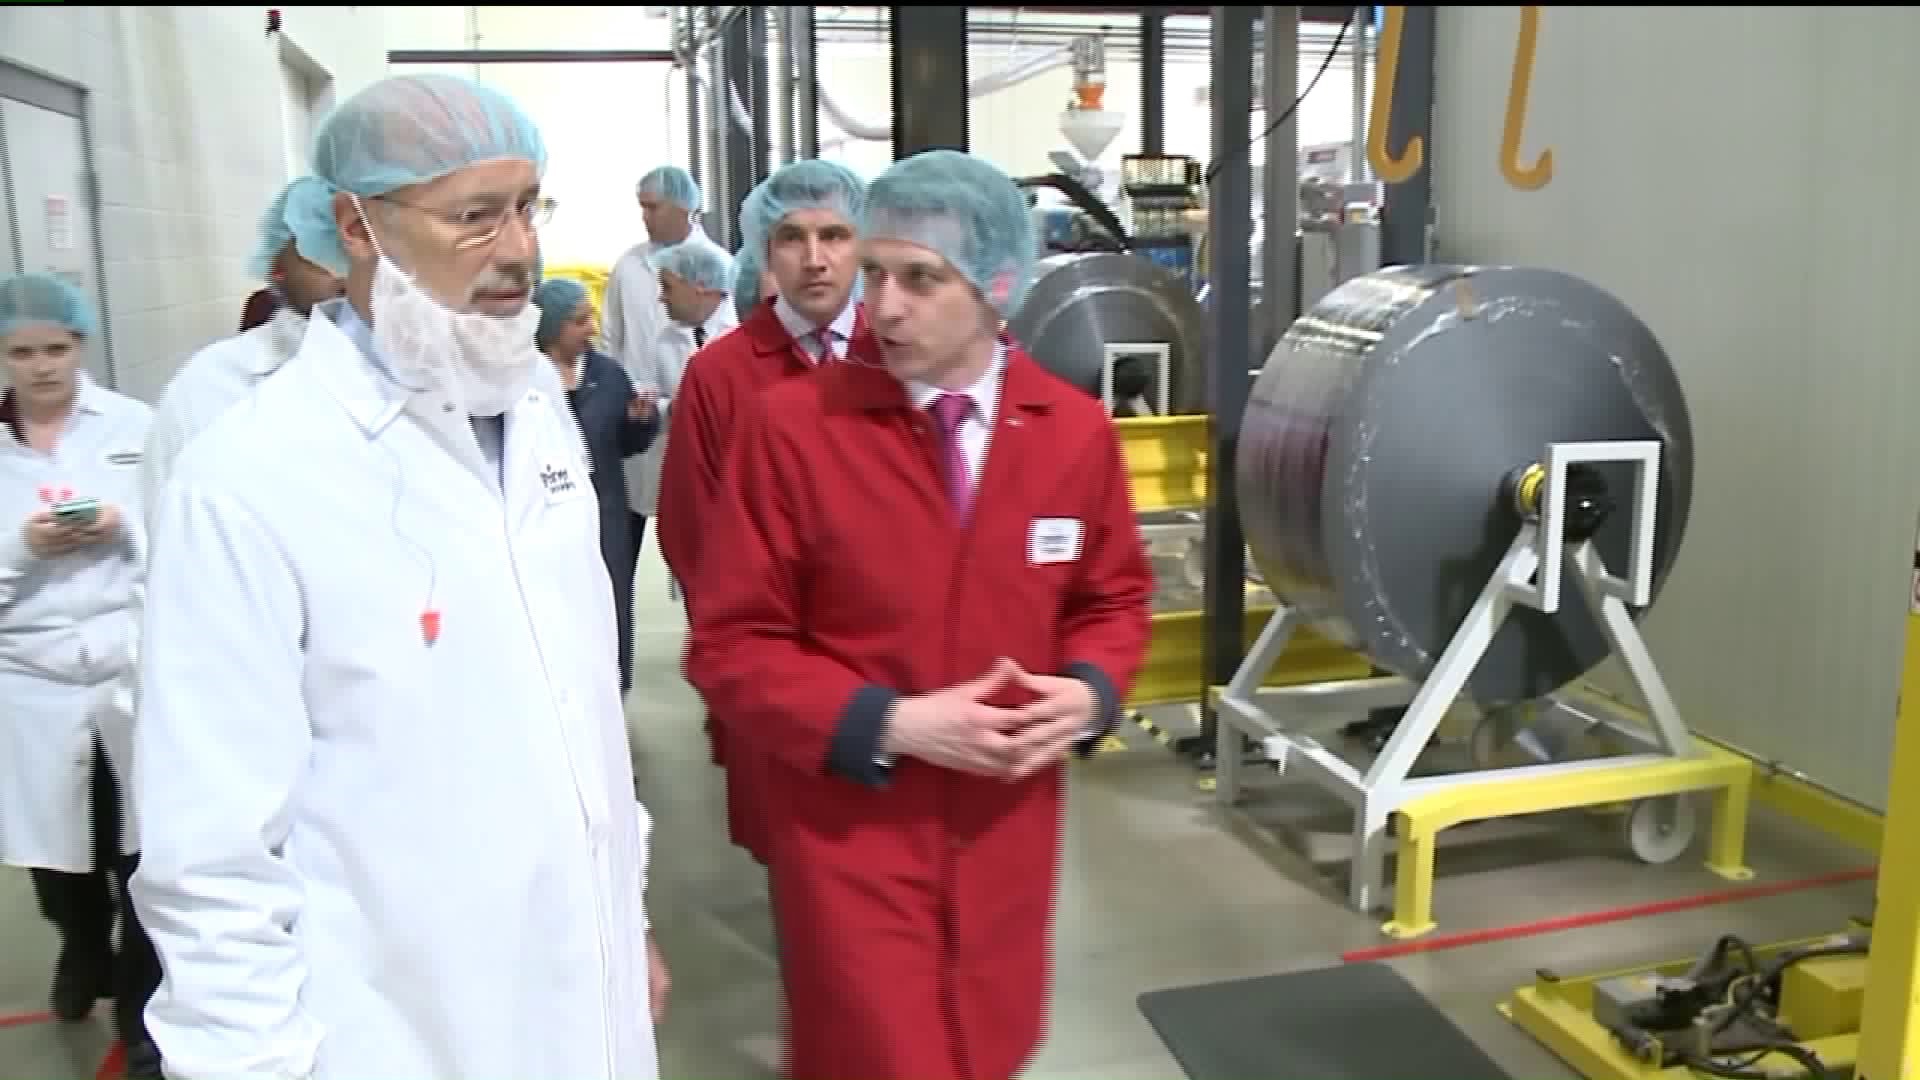 Governor Visits Packaging Plant That Could Pave Way for Future Job Market